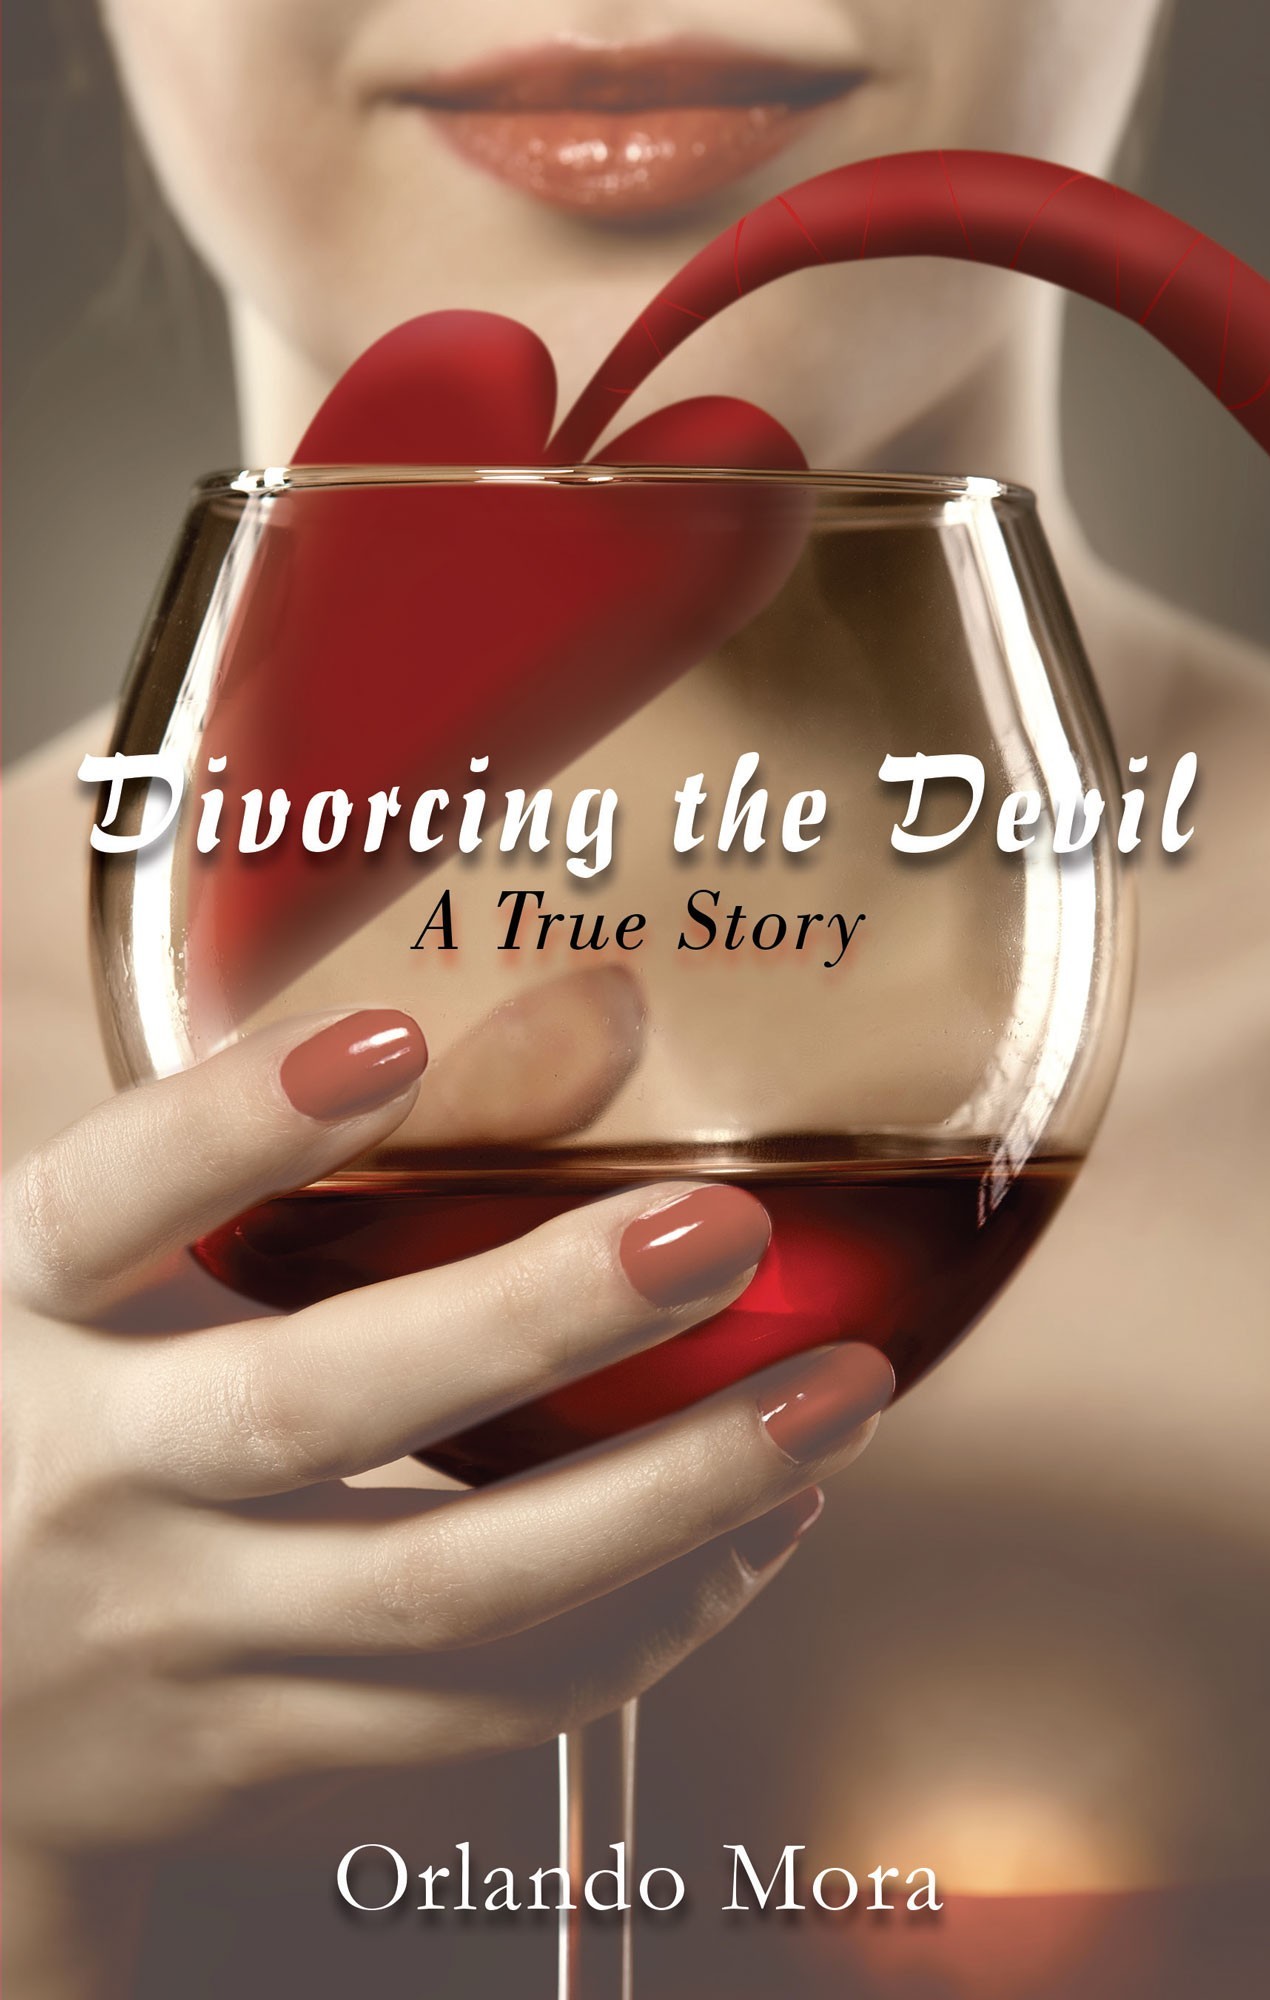 Orlando Mora’s First Book “Divorcing the Devil, a True Story” is the